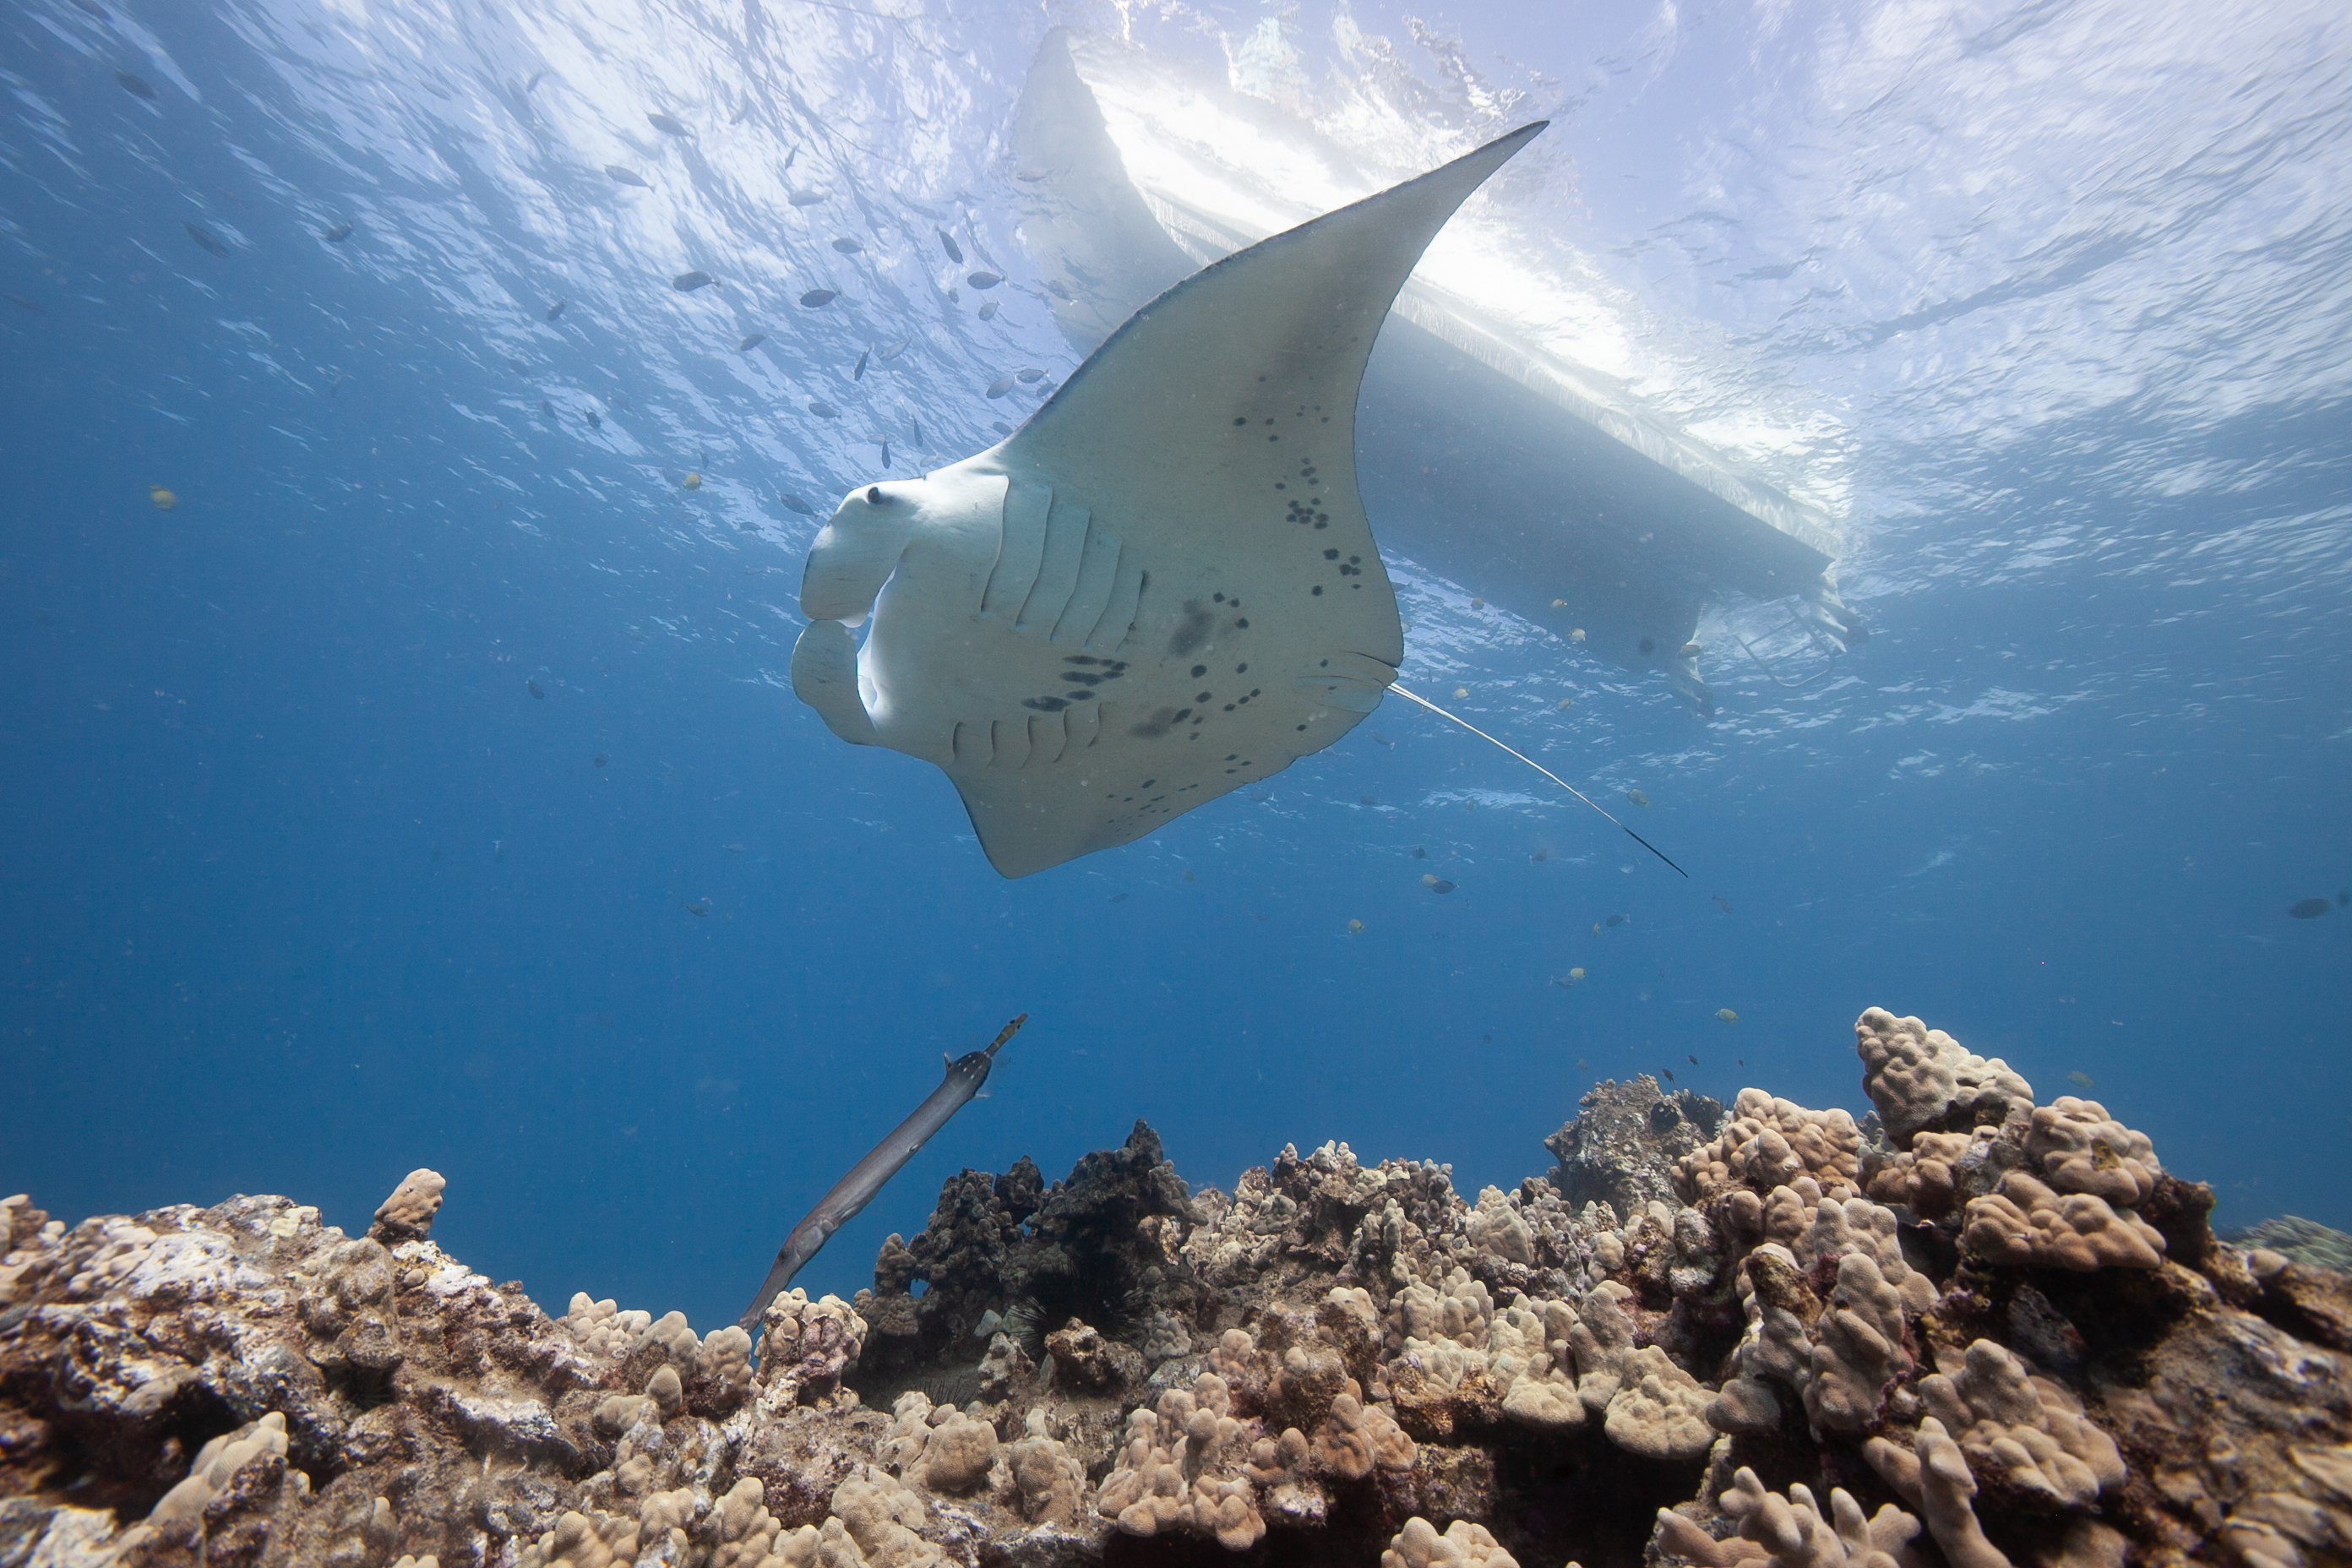 Image: Genetic Study Finds Reef Manta Rays Stay Close to Home